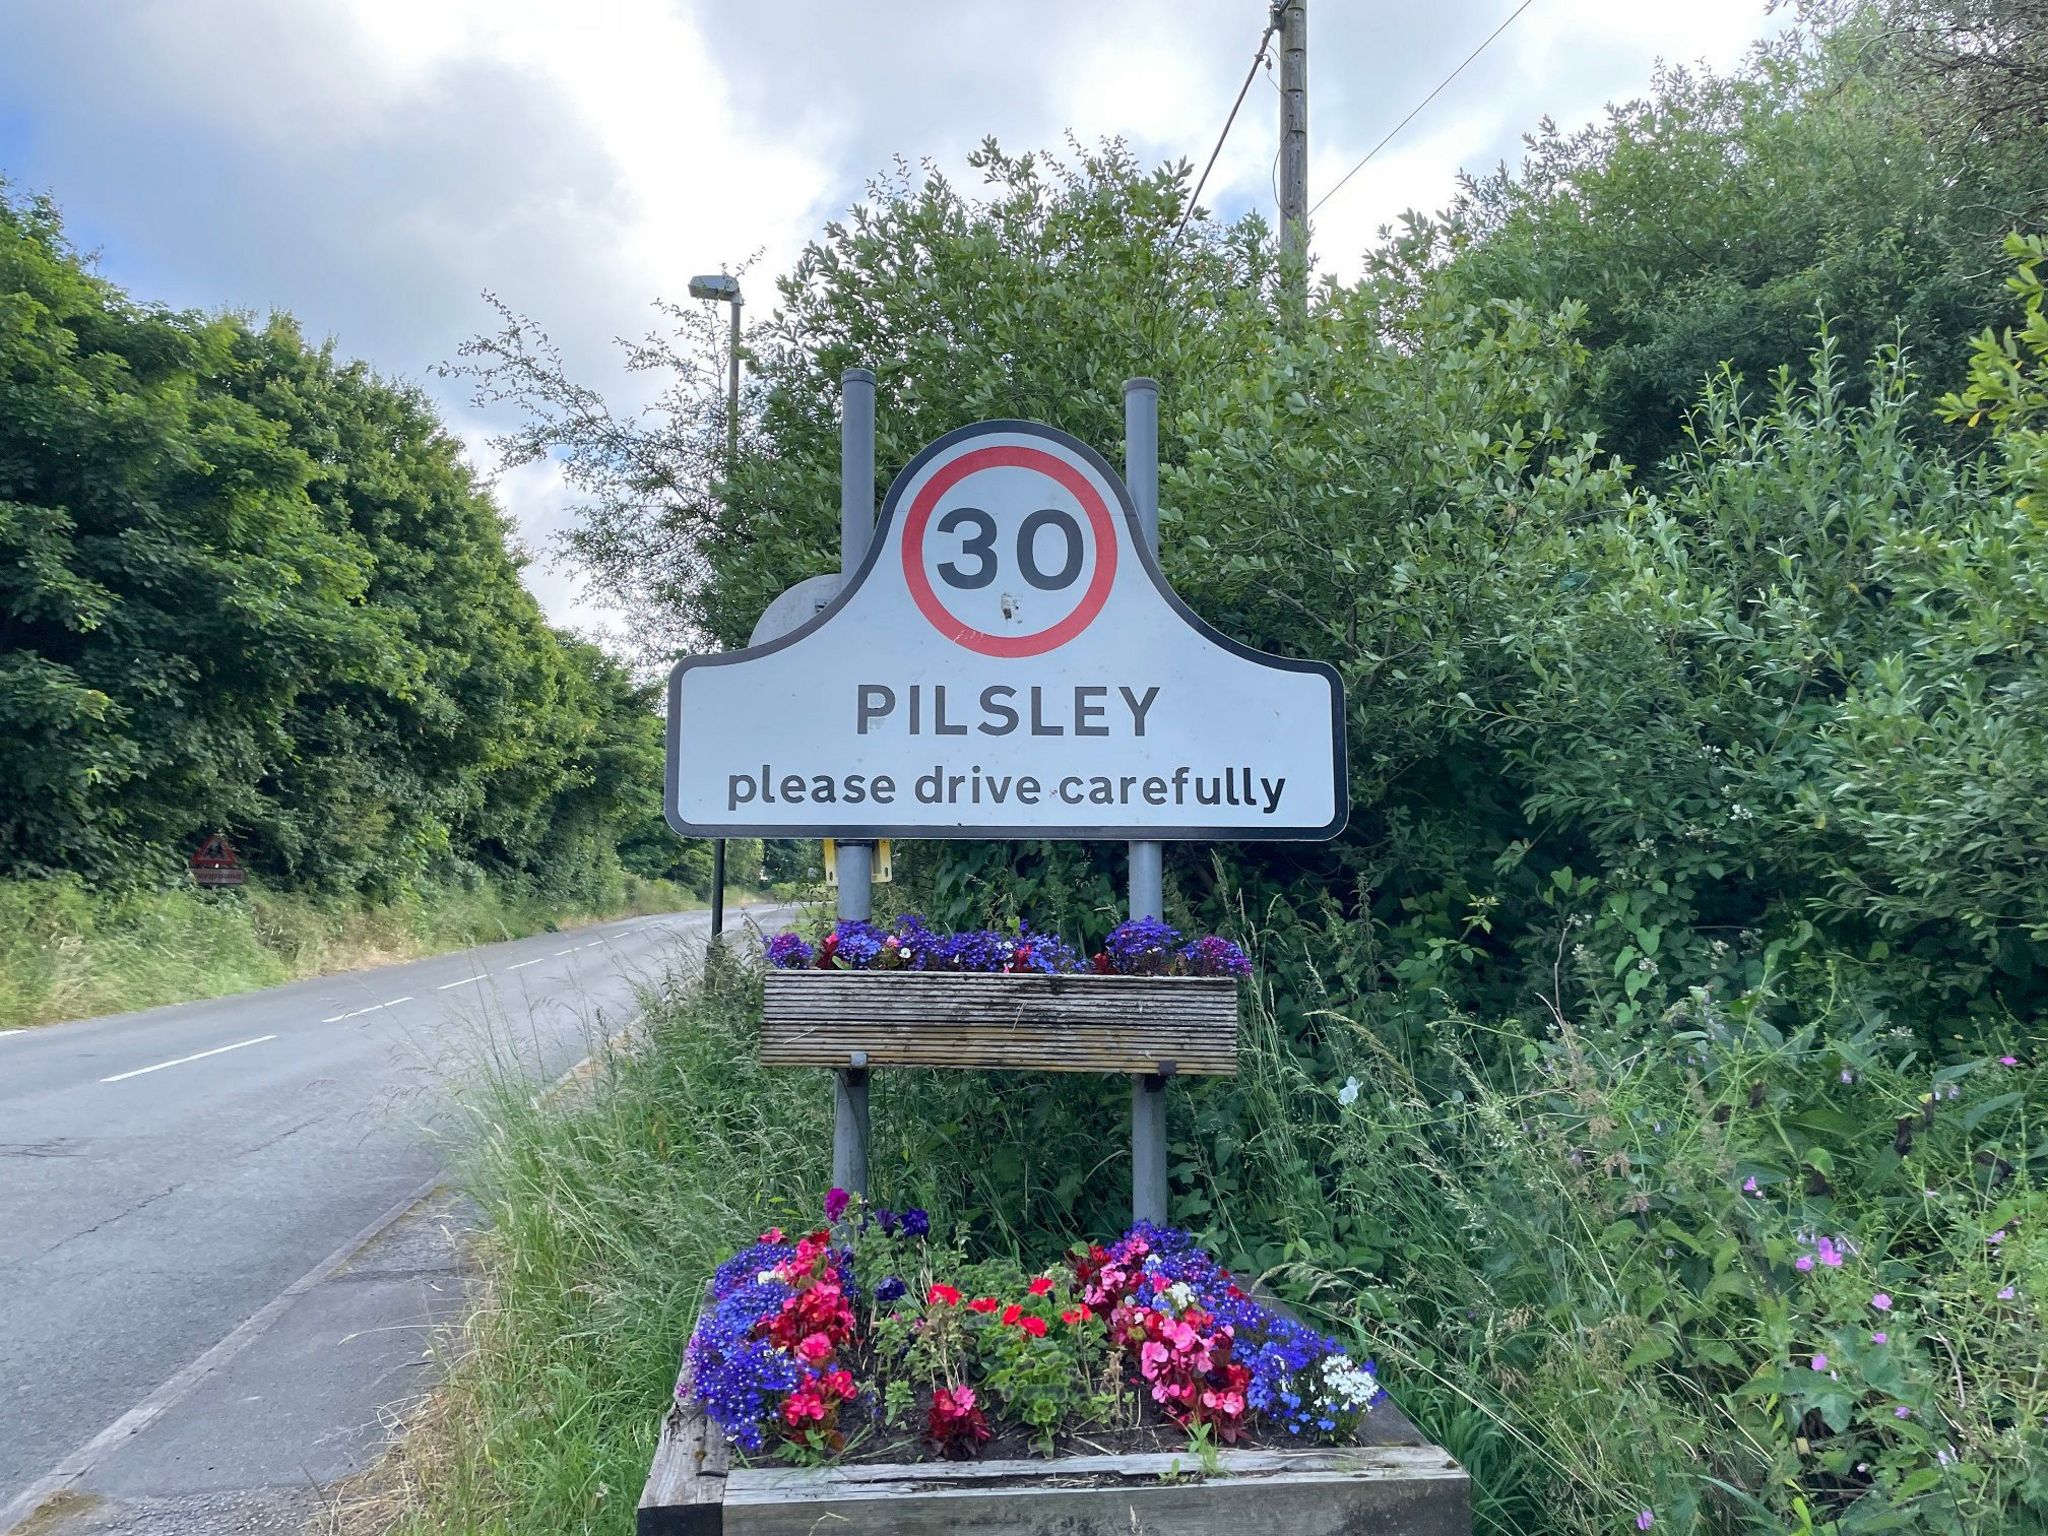 Pilsley road sign and flowers in planters